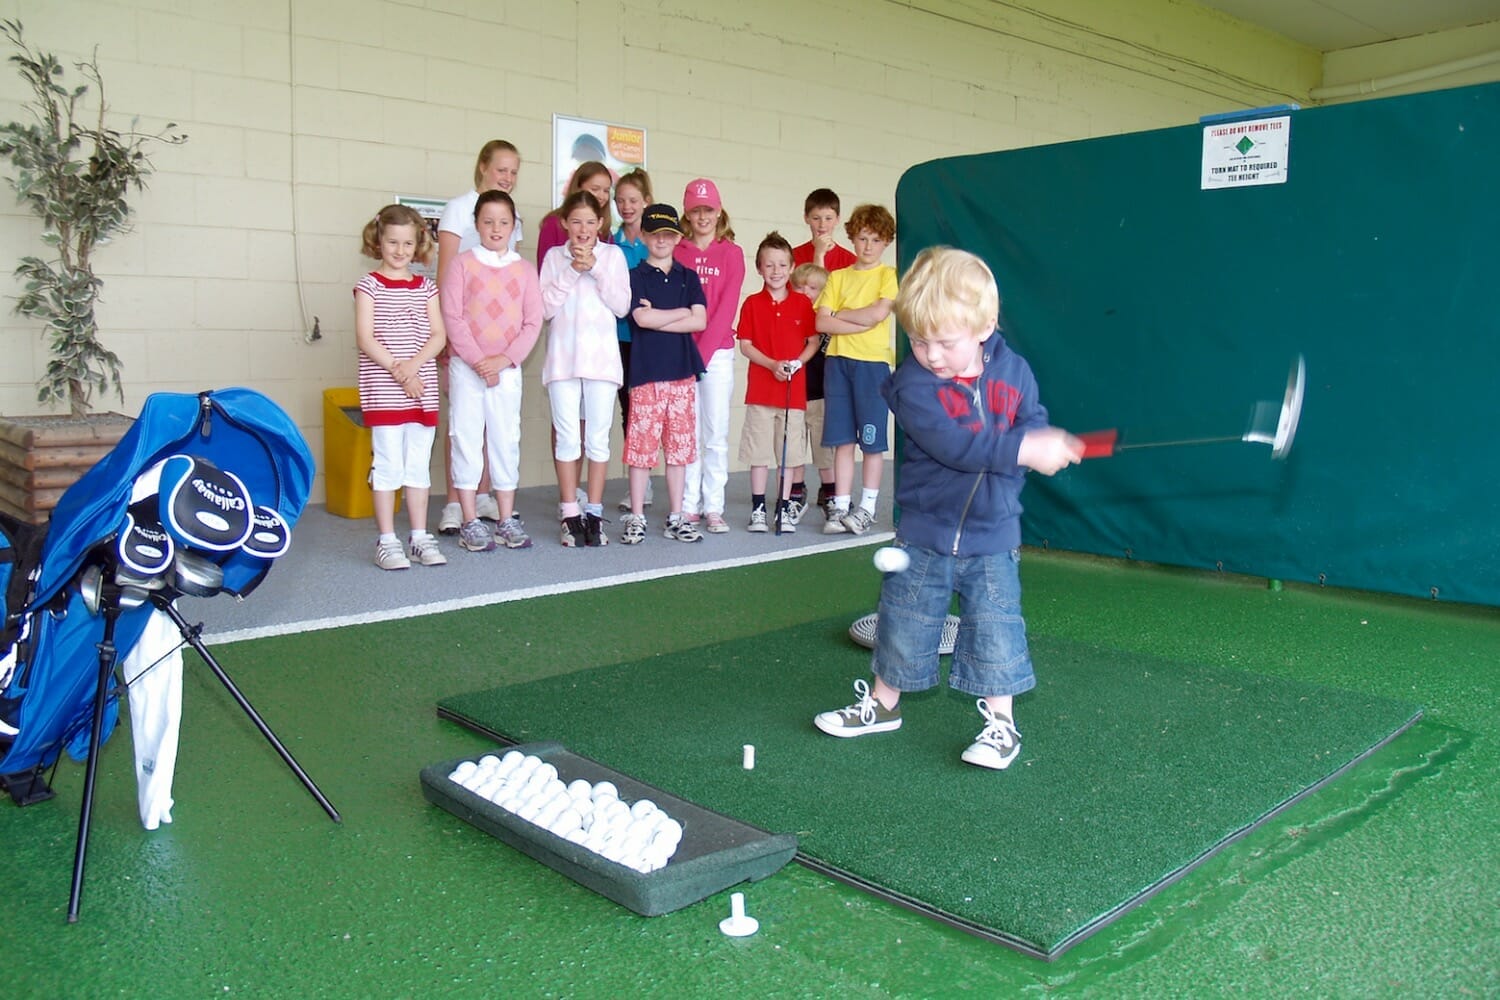 Junior golf summer camps back at Play2LearnGolf